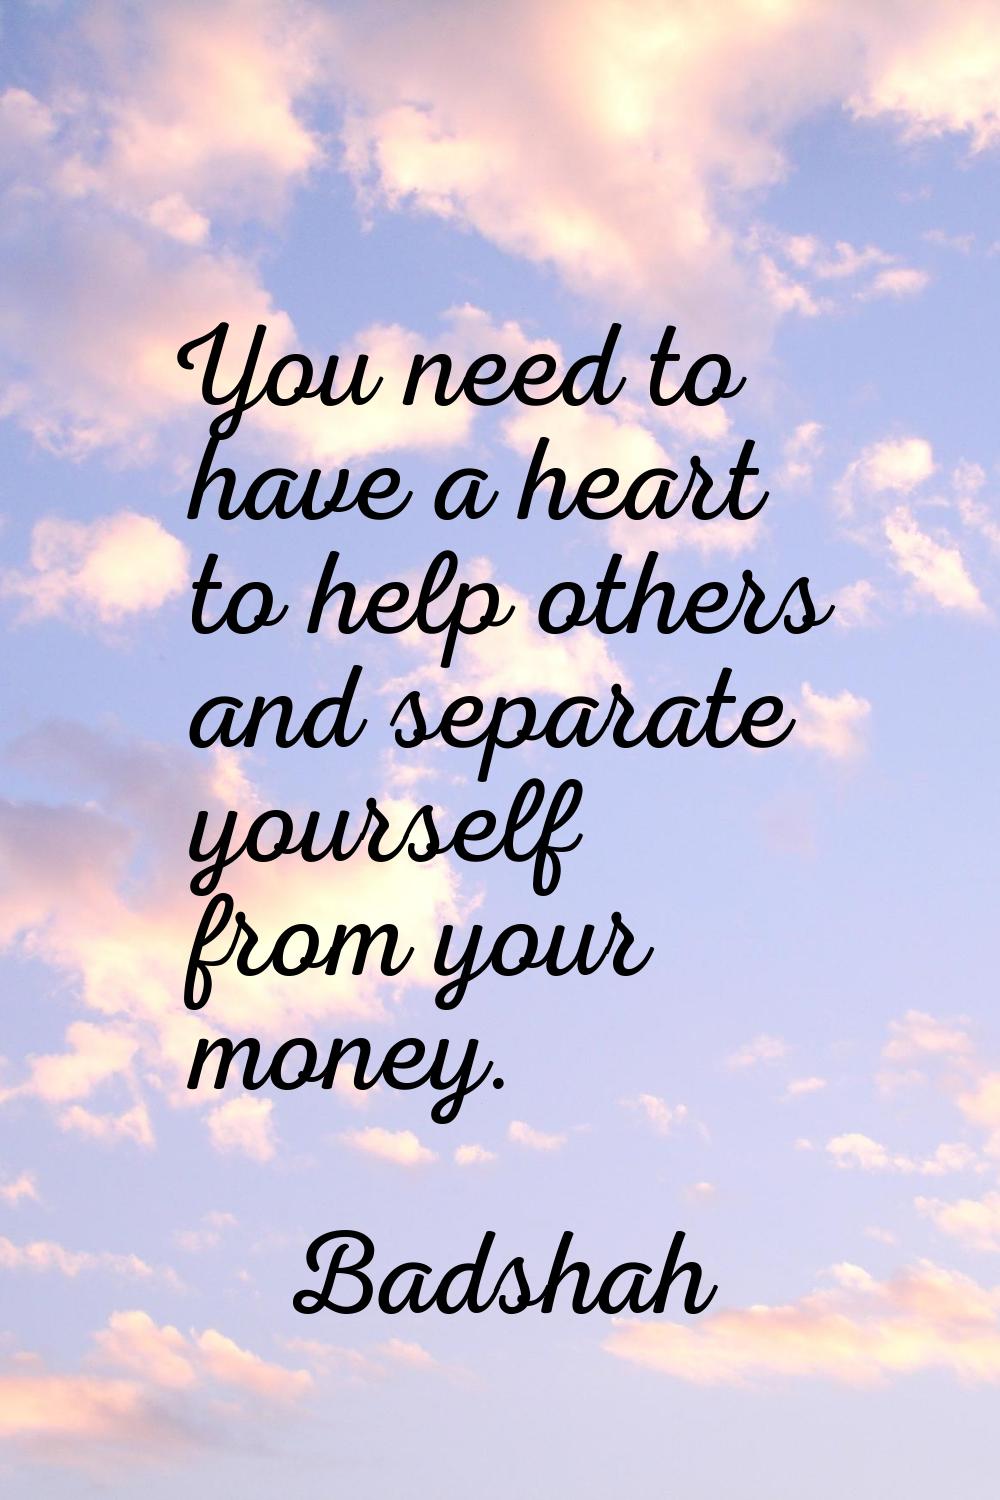 You need to have a heart to help others and separate yourself from your money.